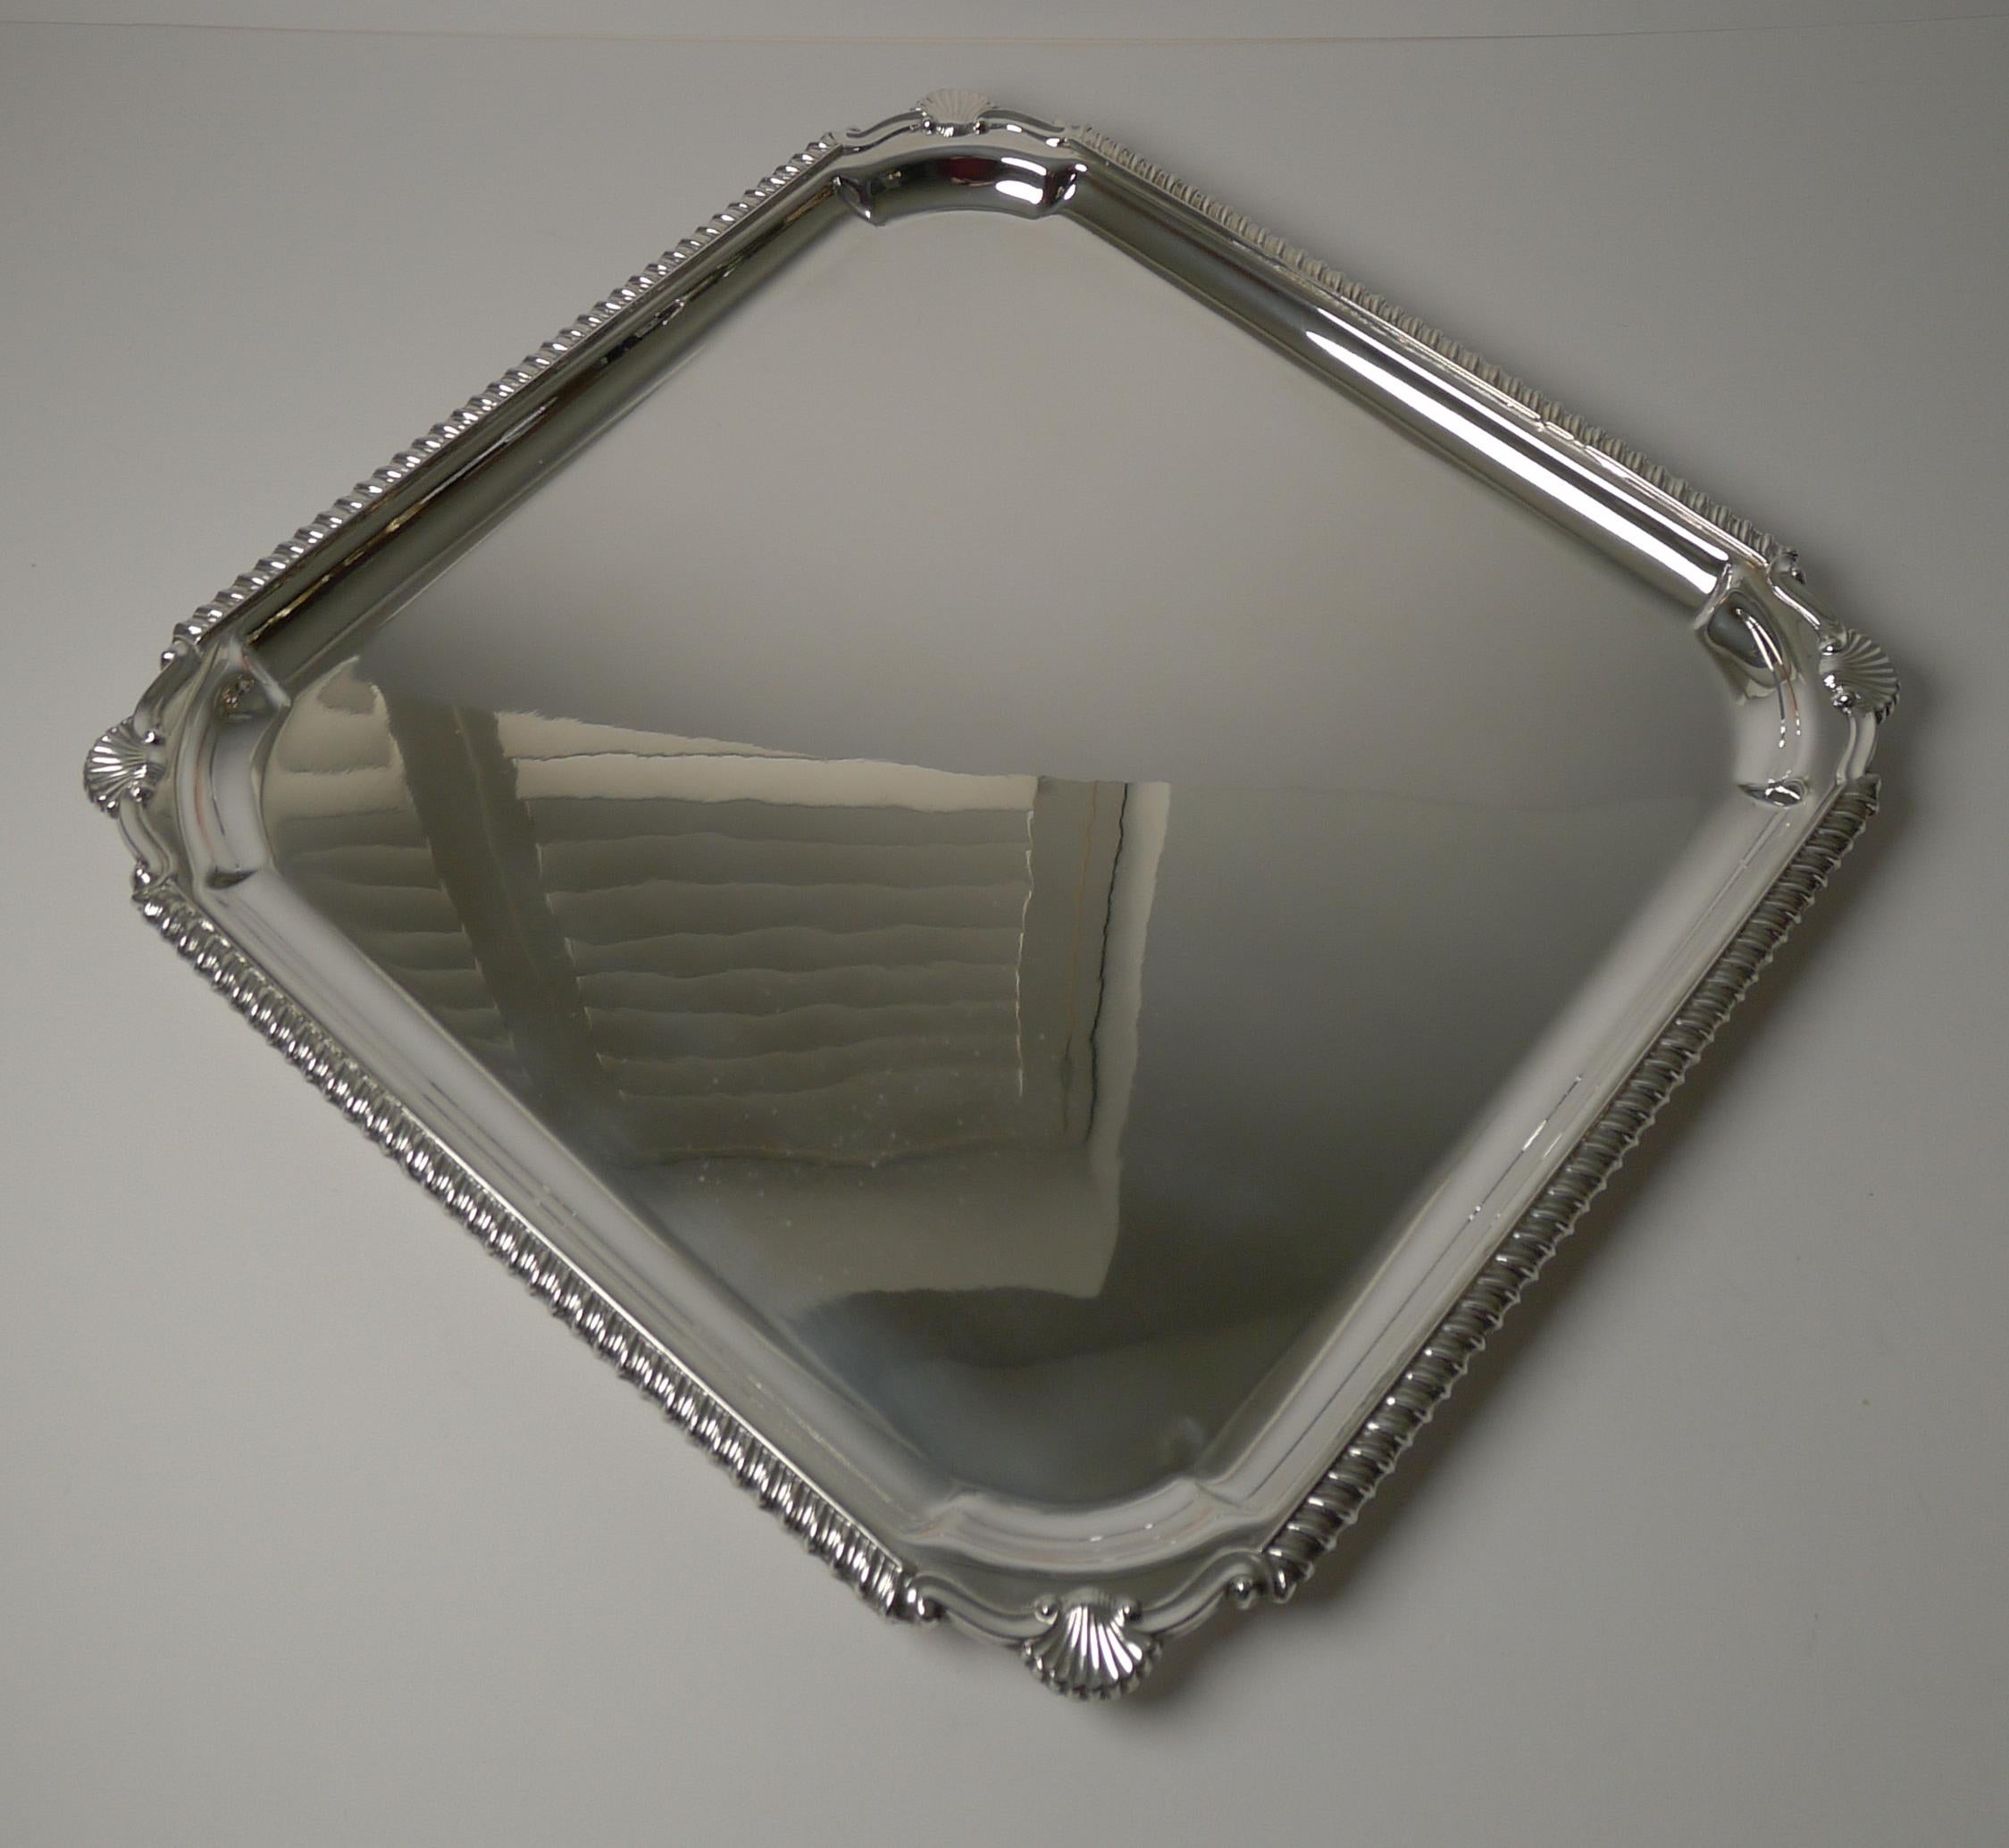 Art Deco Large English Square Silver Plated Cocktail / Drinks Tray c.1930